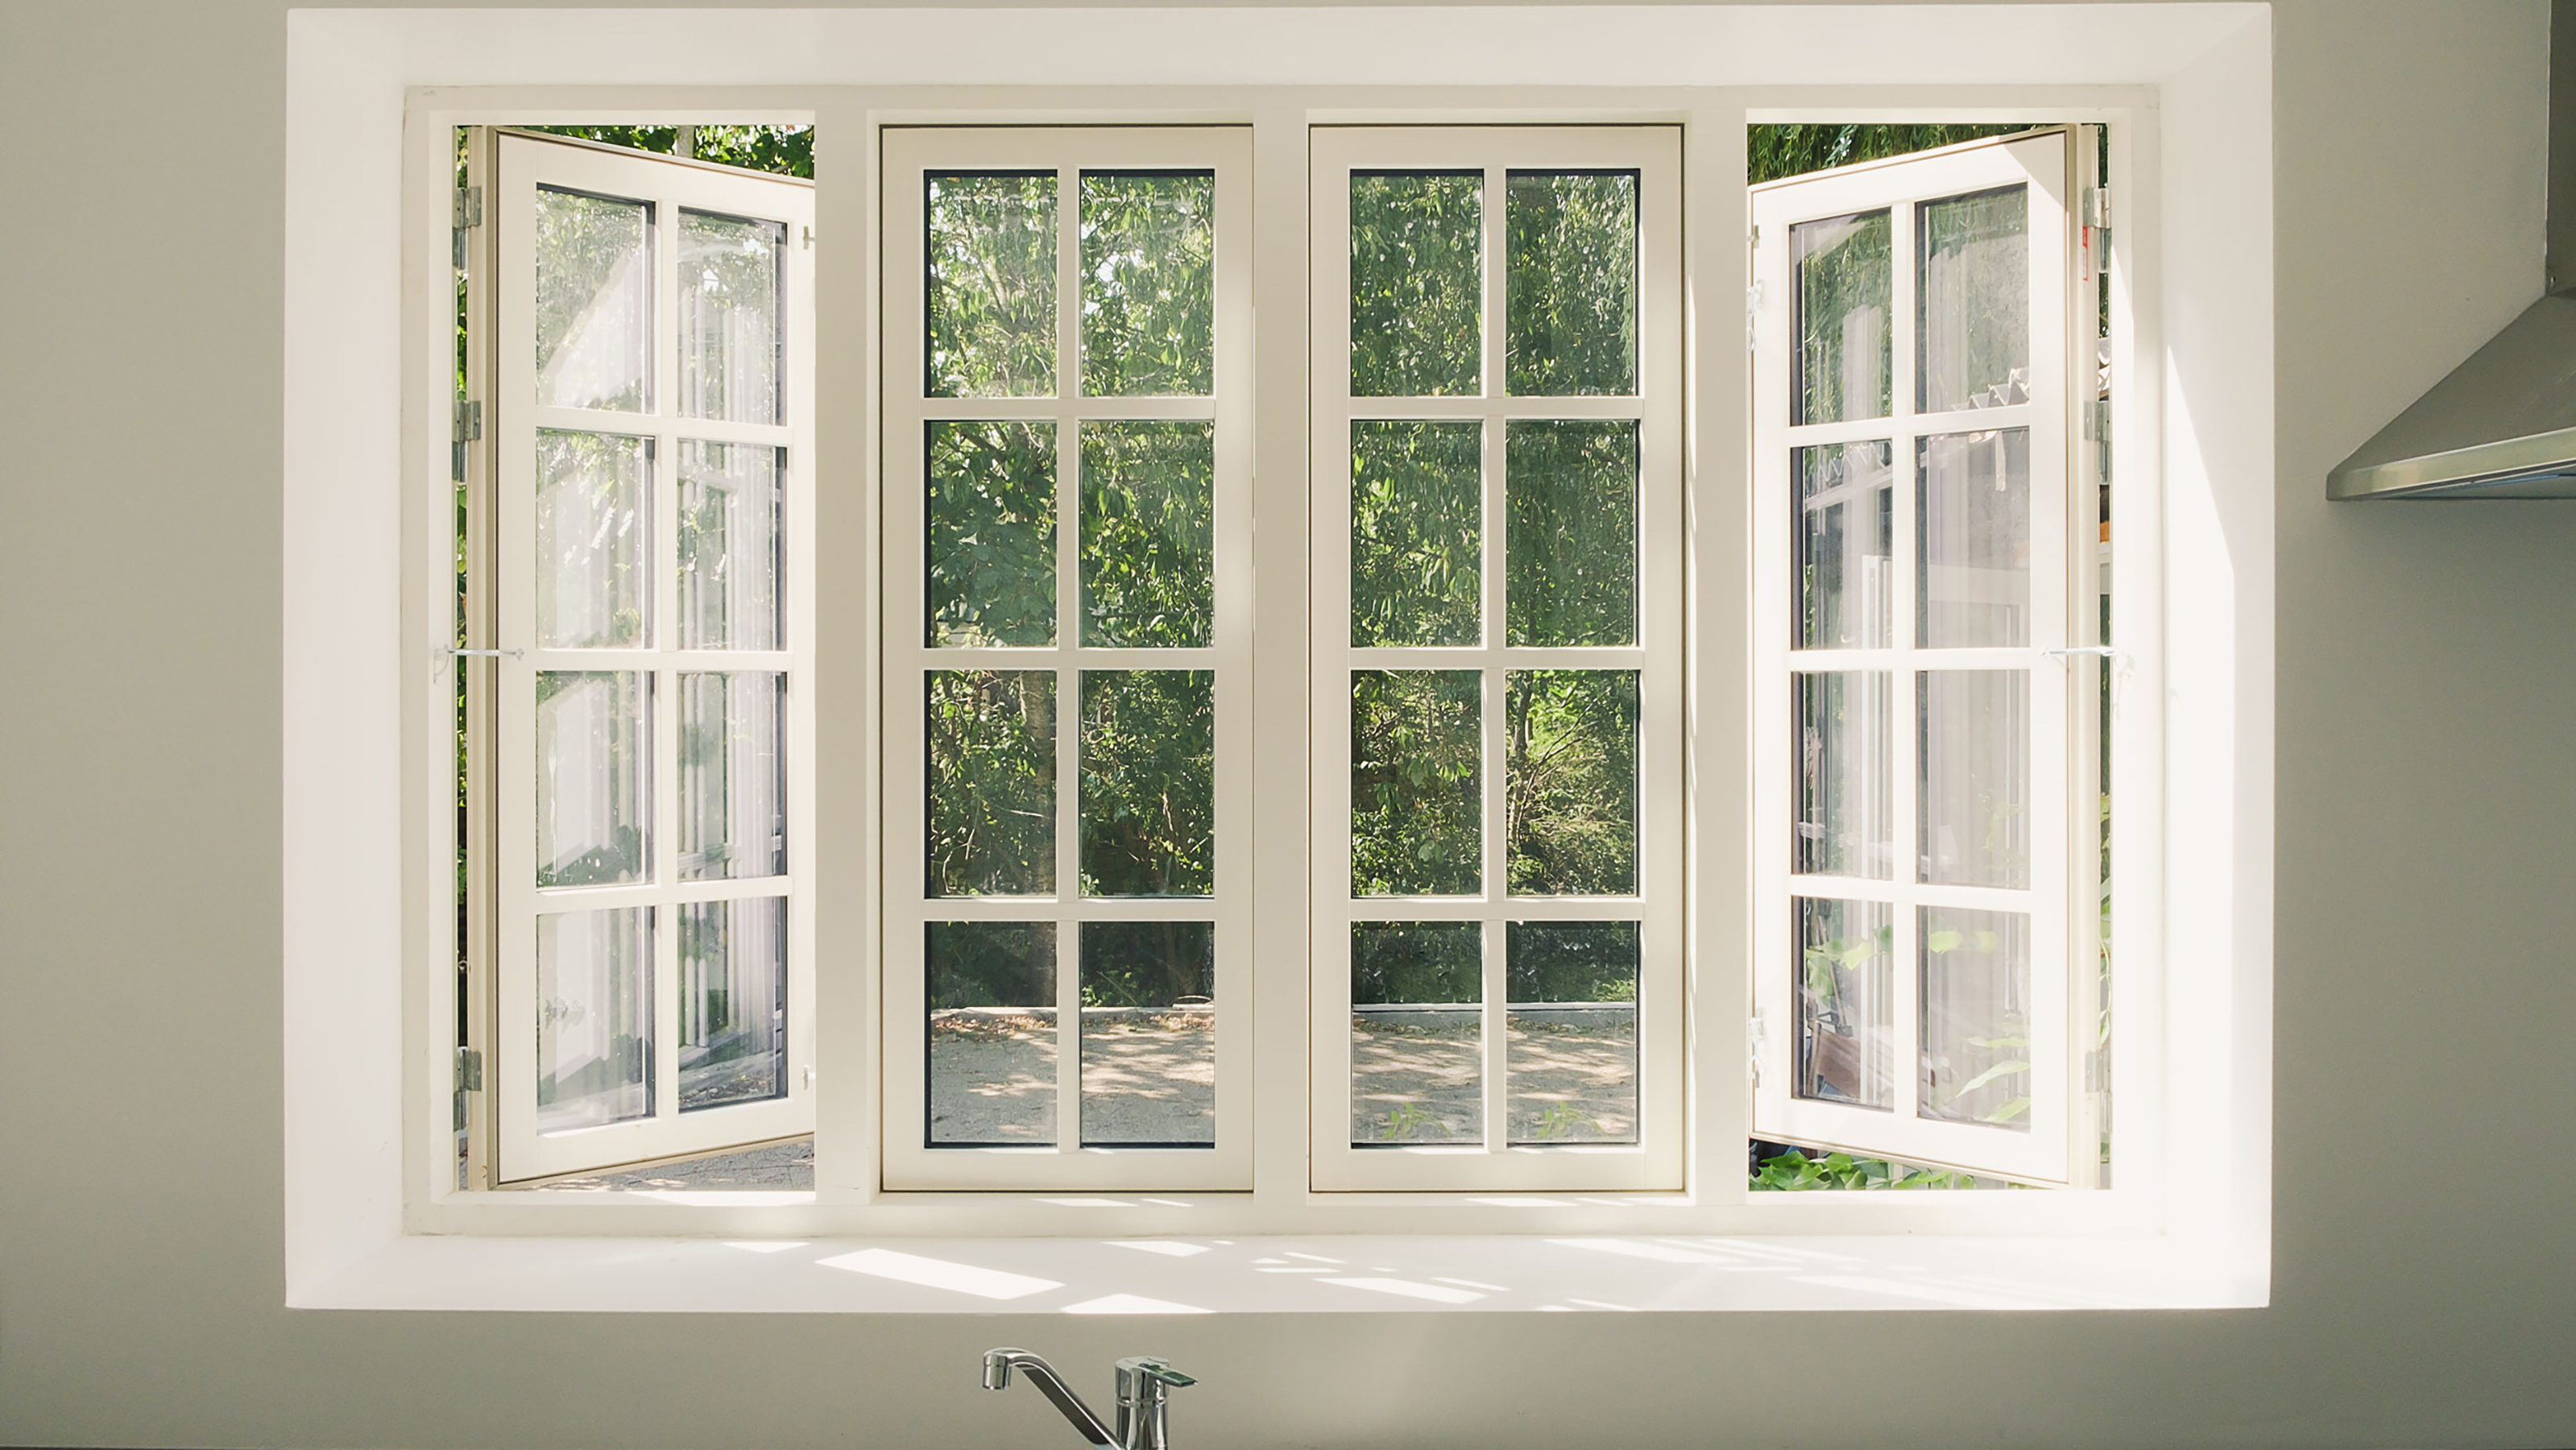 Number One Reasons to Consider Double-Glazed Windows